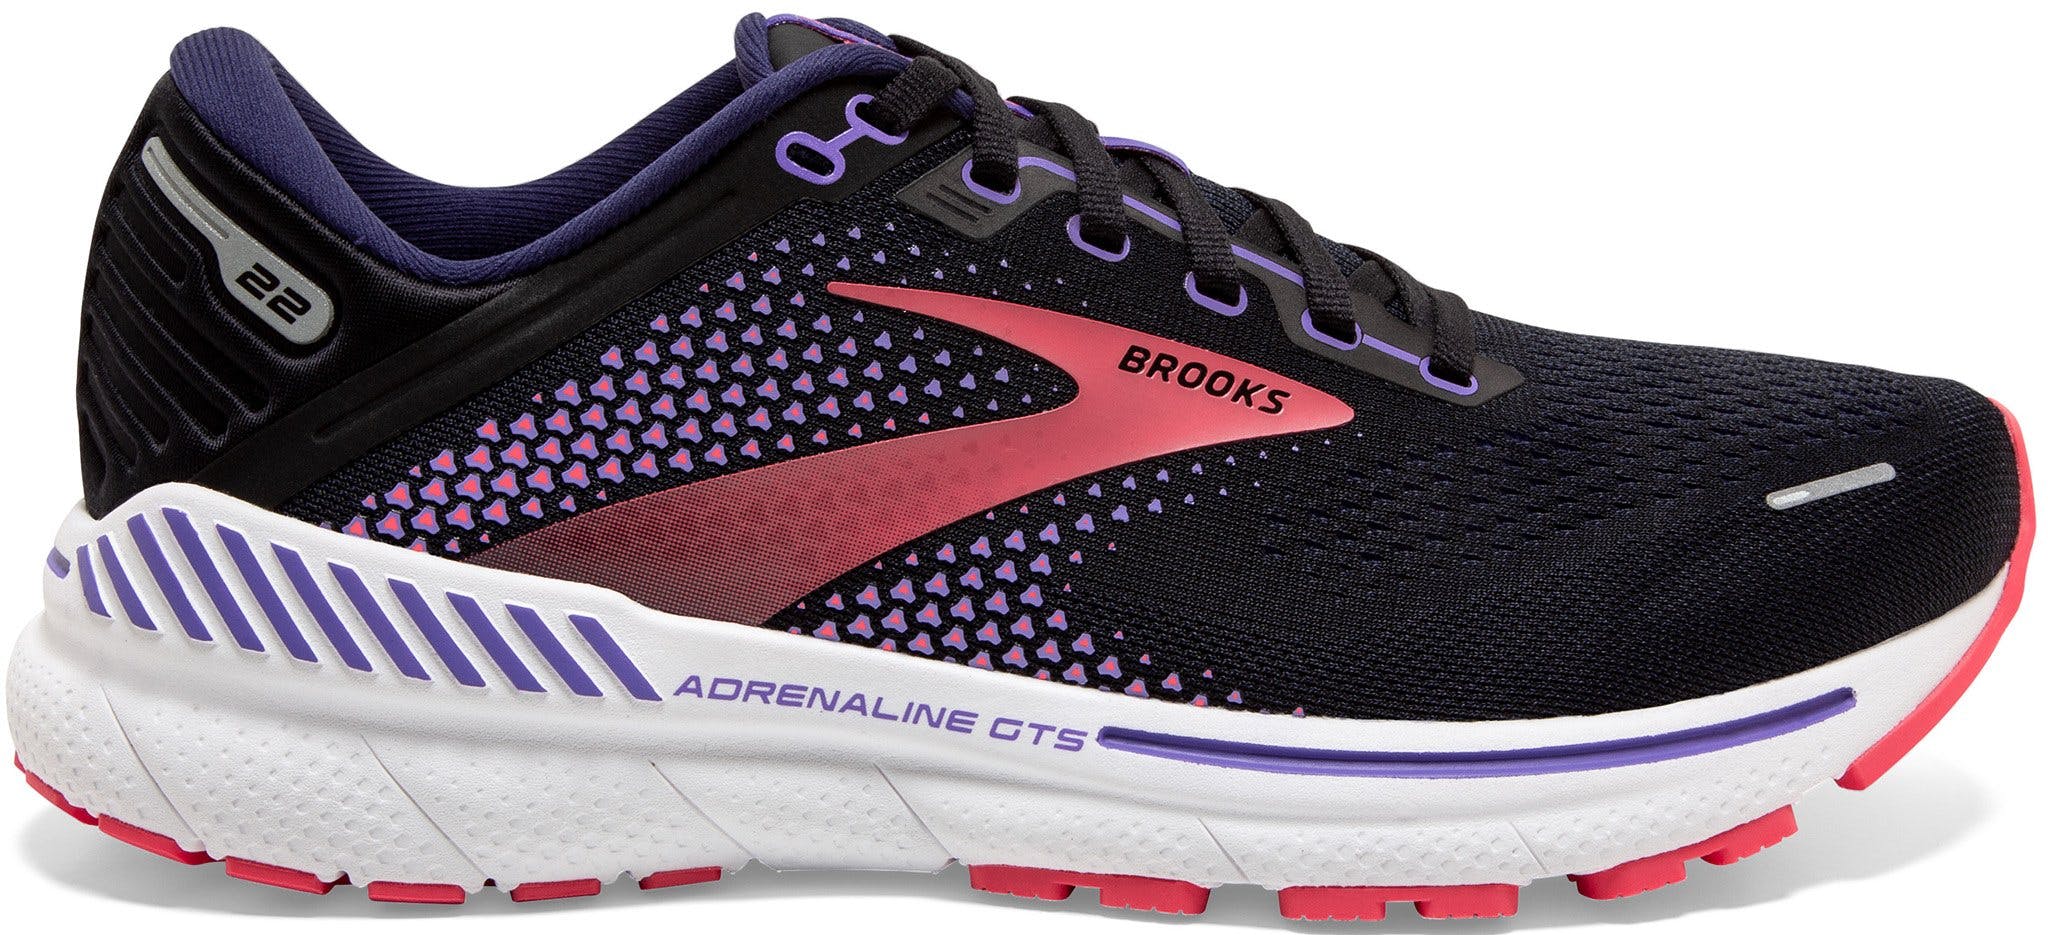 Product image for Adrenaline GTS 22 Running Shoes - Women's